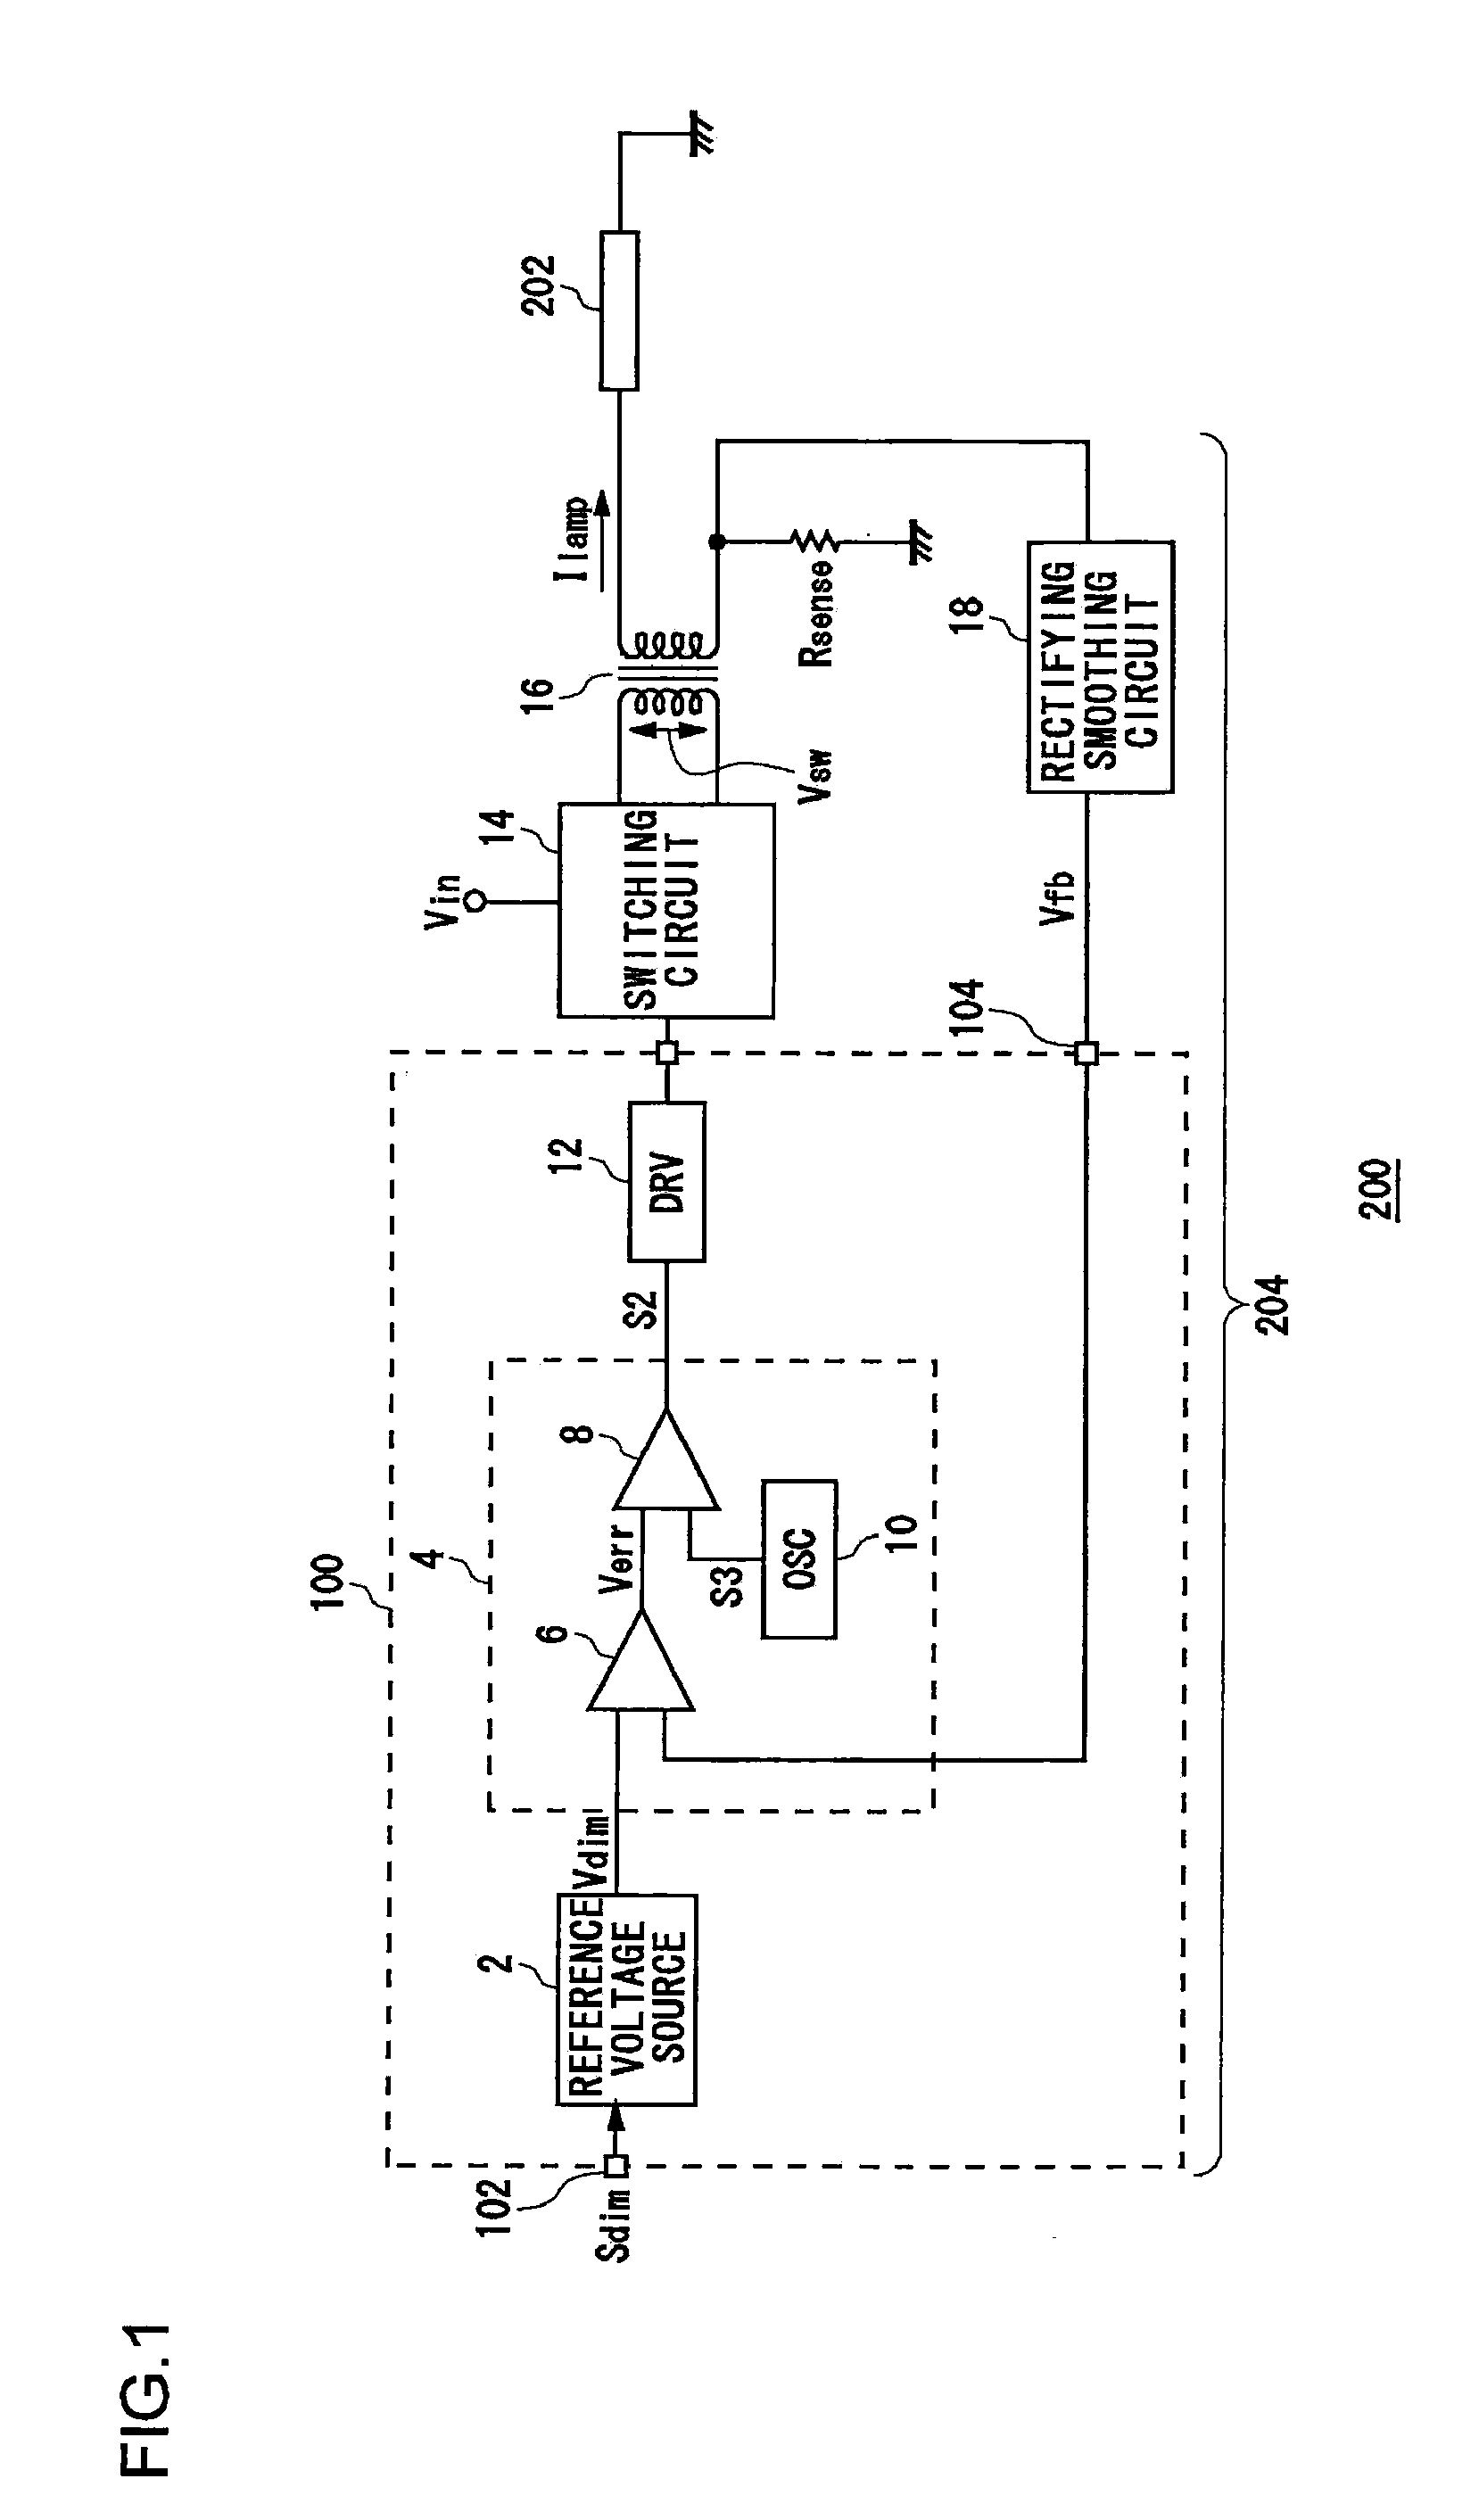 Control circuit for inverter